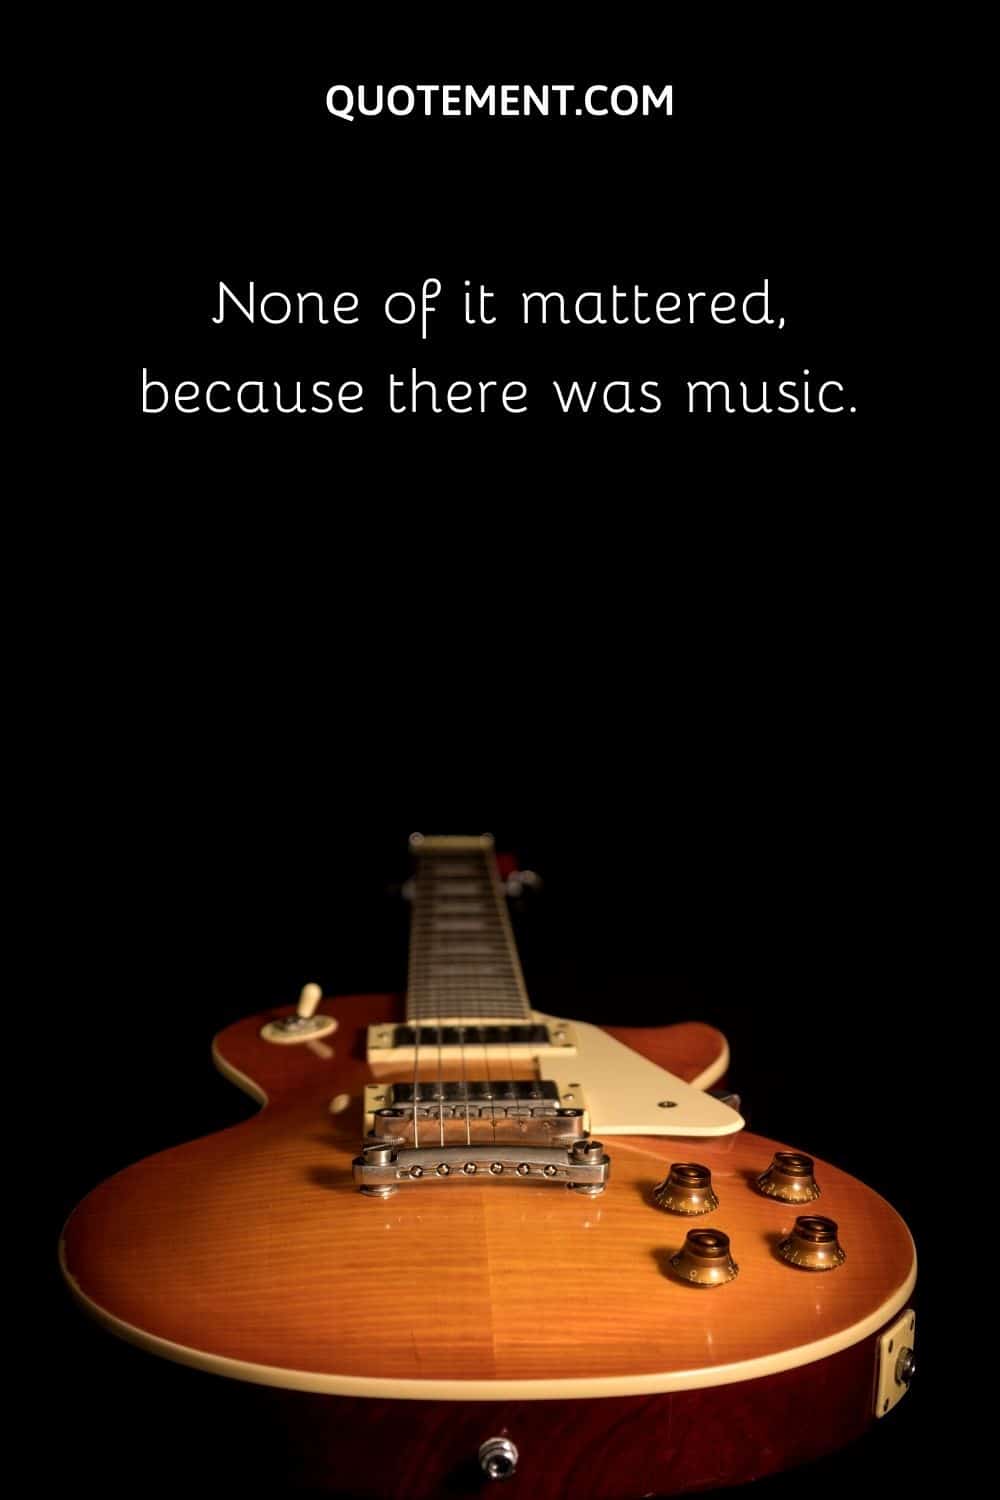 None of it mattered, because there was music.